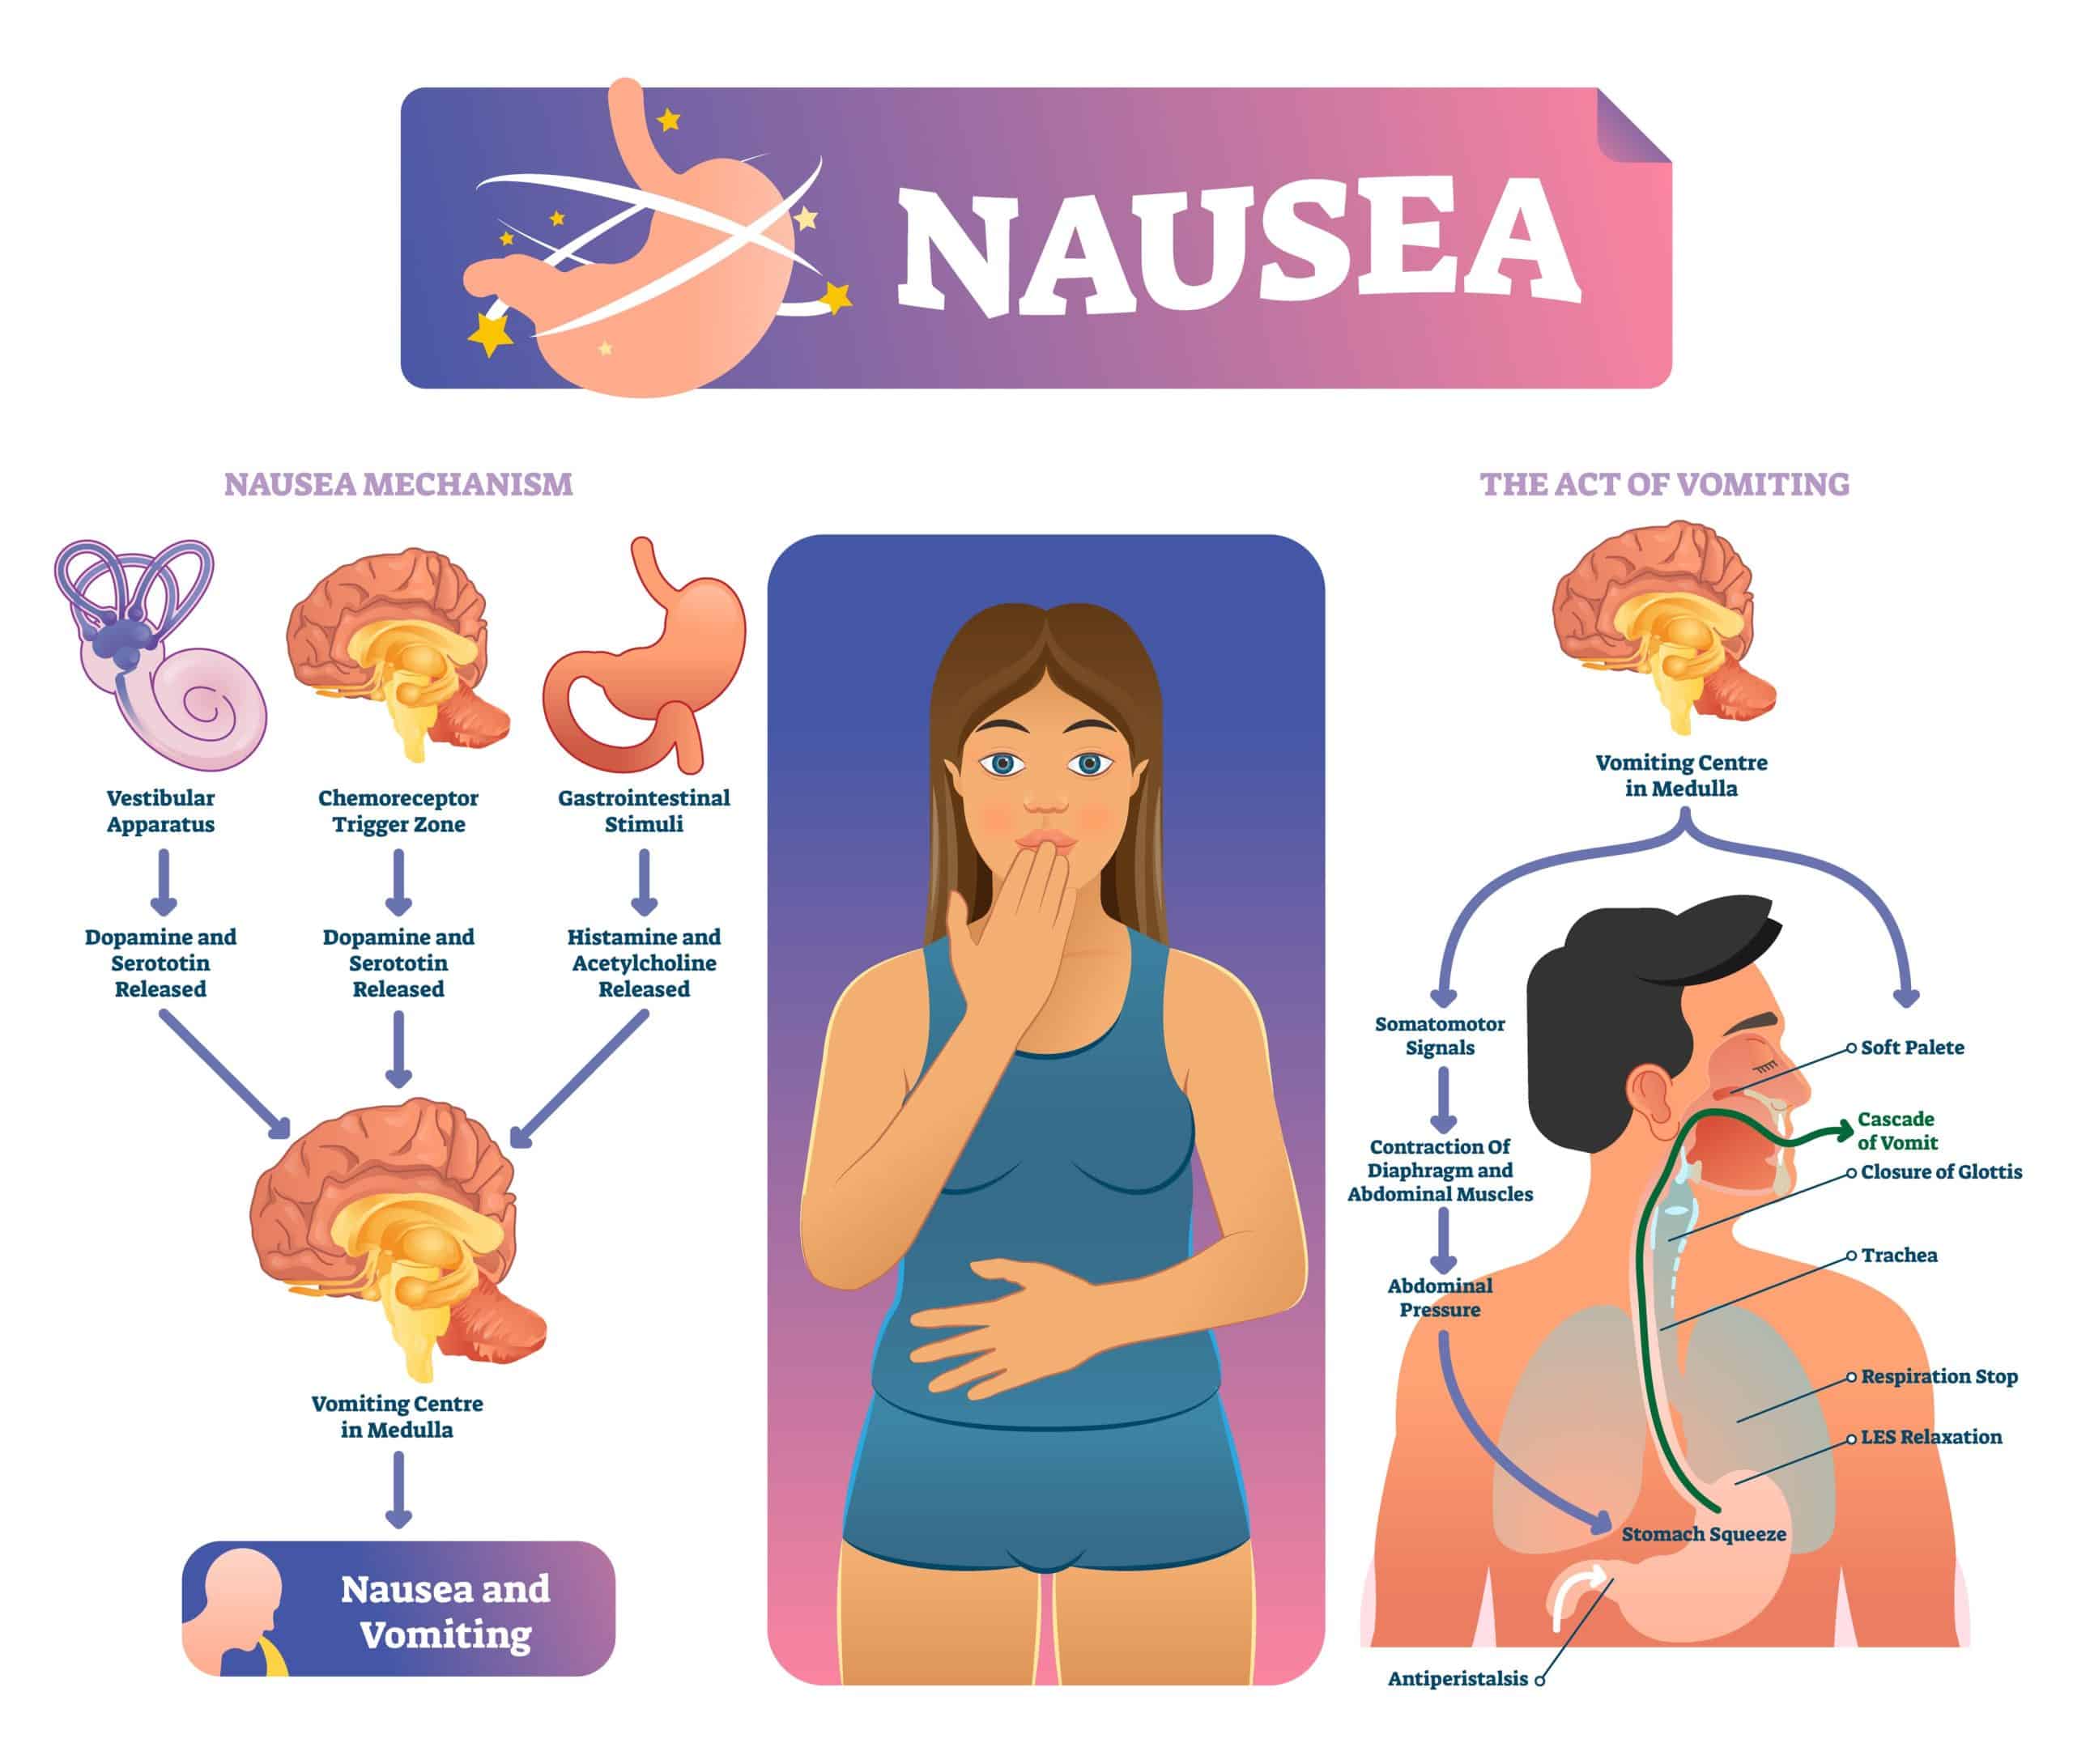 CTZ role in nausea and vomiting